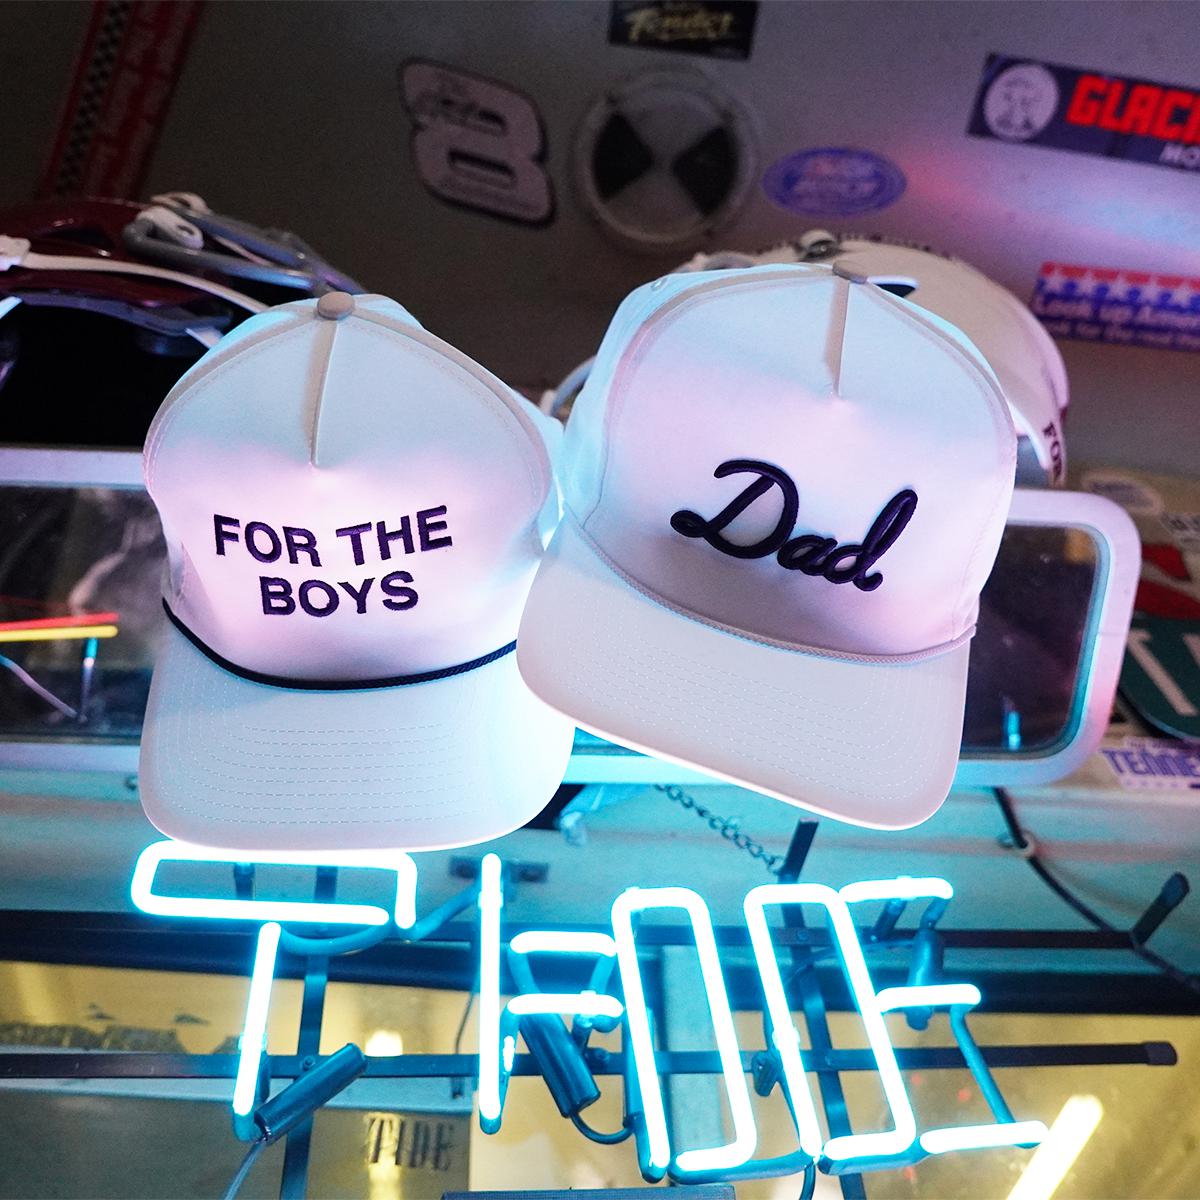 Dad Imperial Rope Hat-Hats-Bussin With The Boys-Barstool Sports